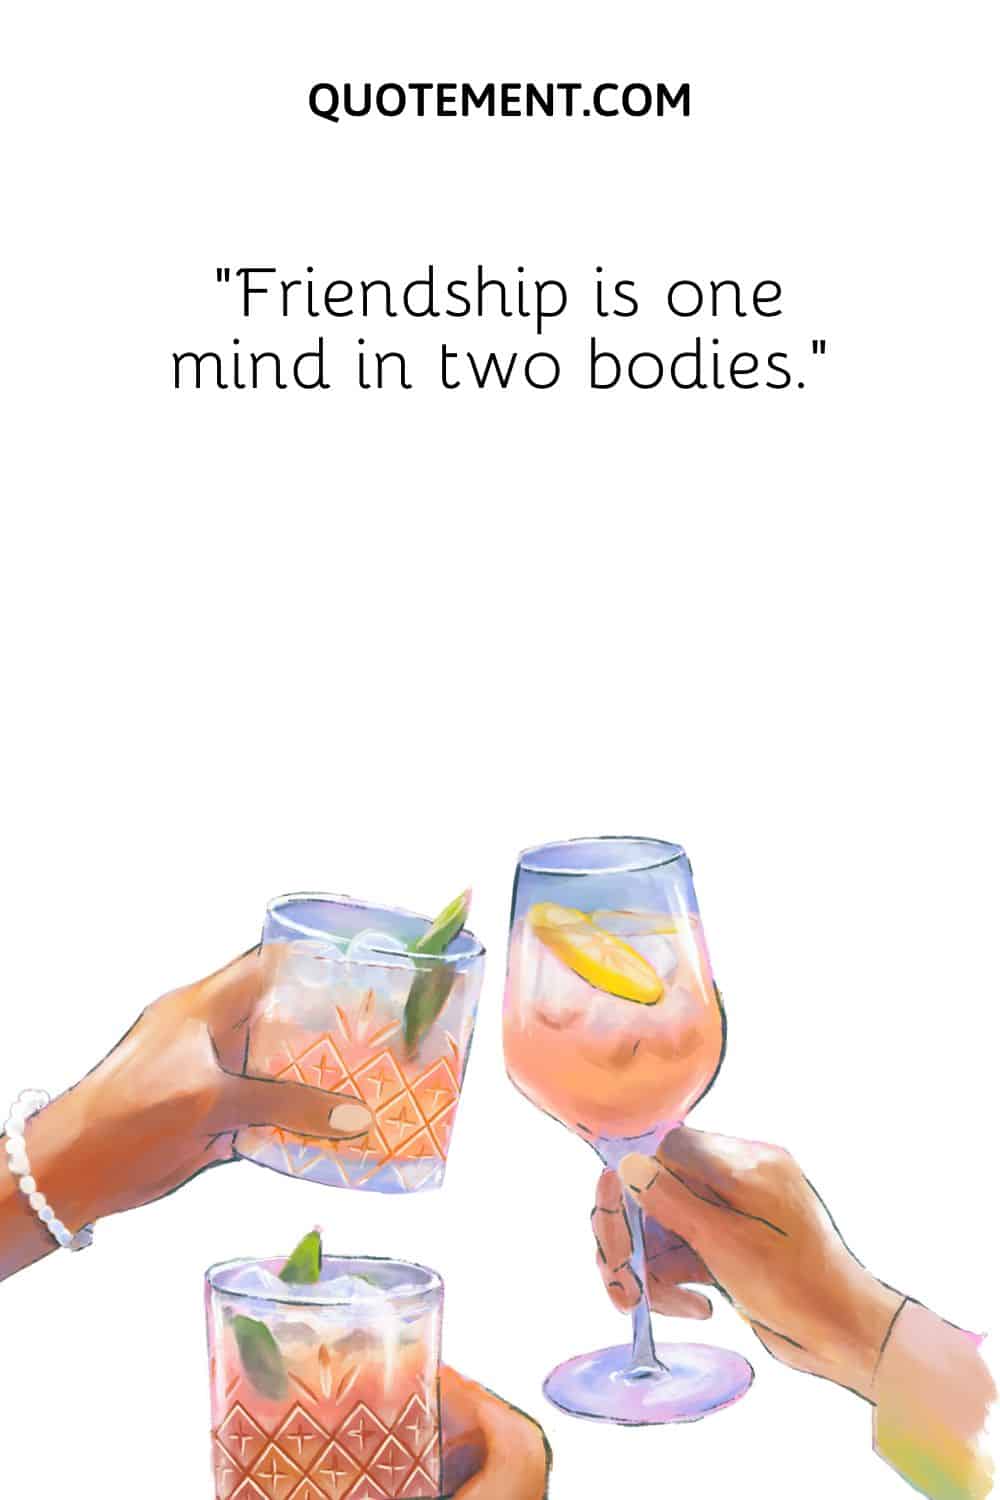 “Friendship is one mind in two bodies.”